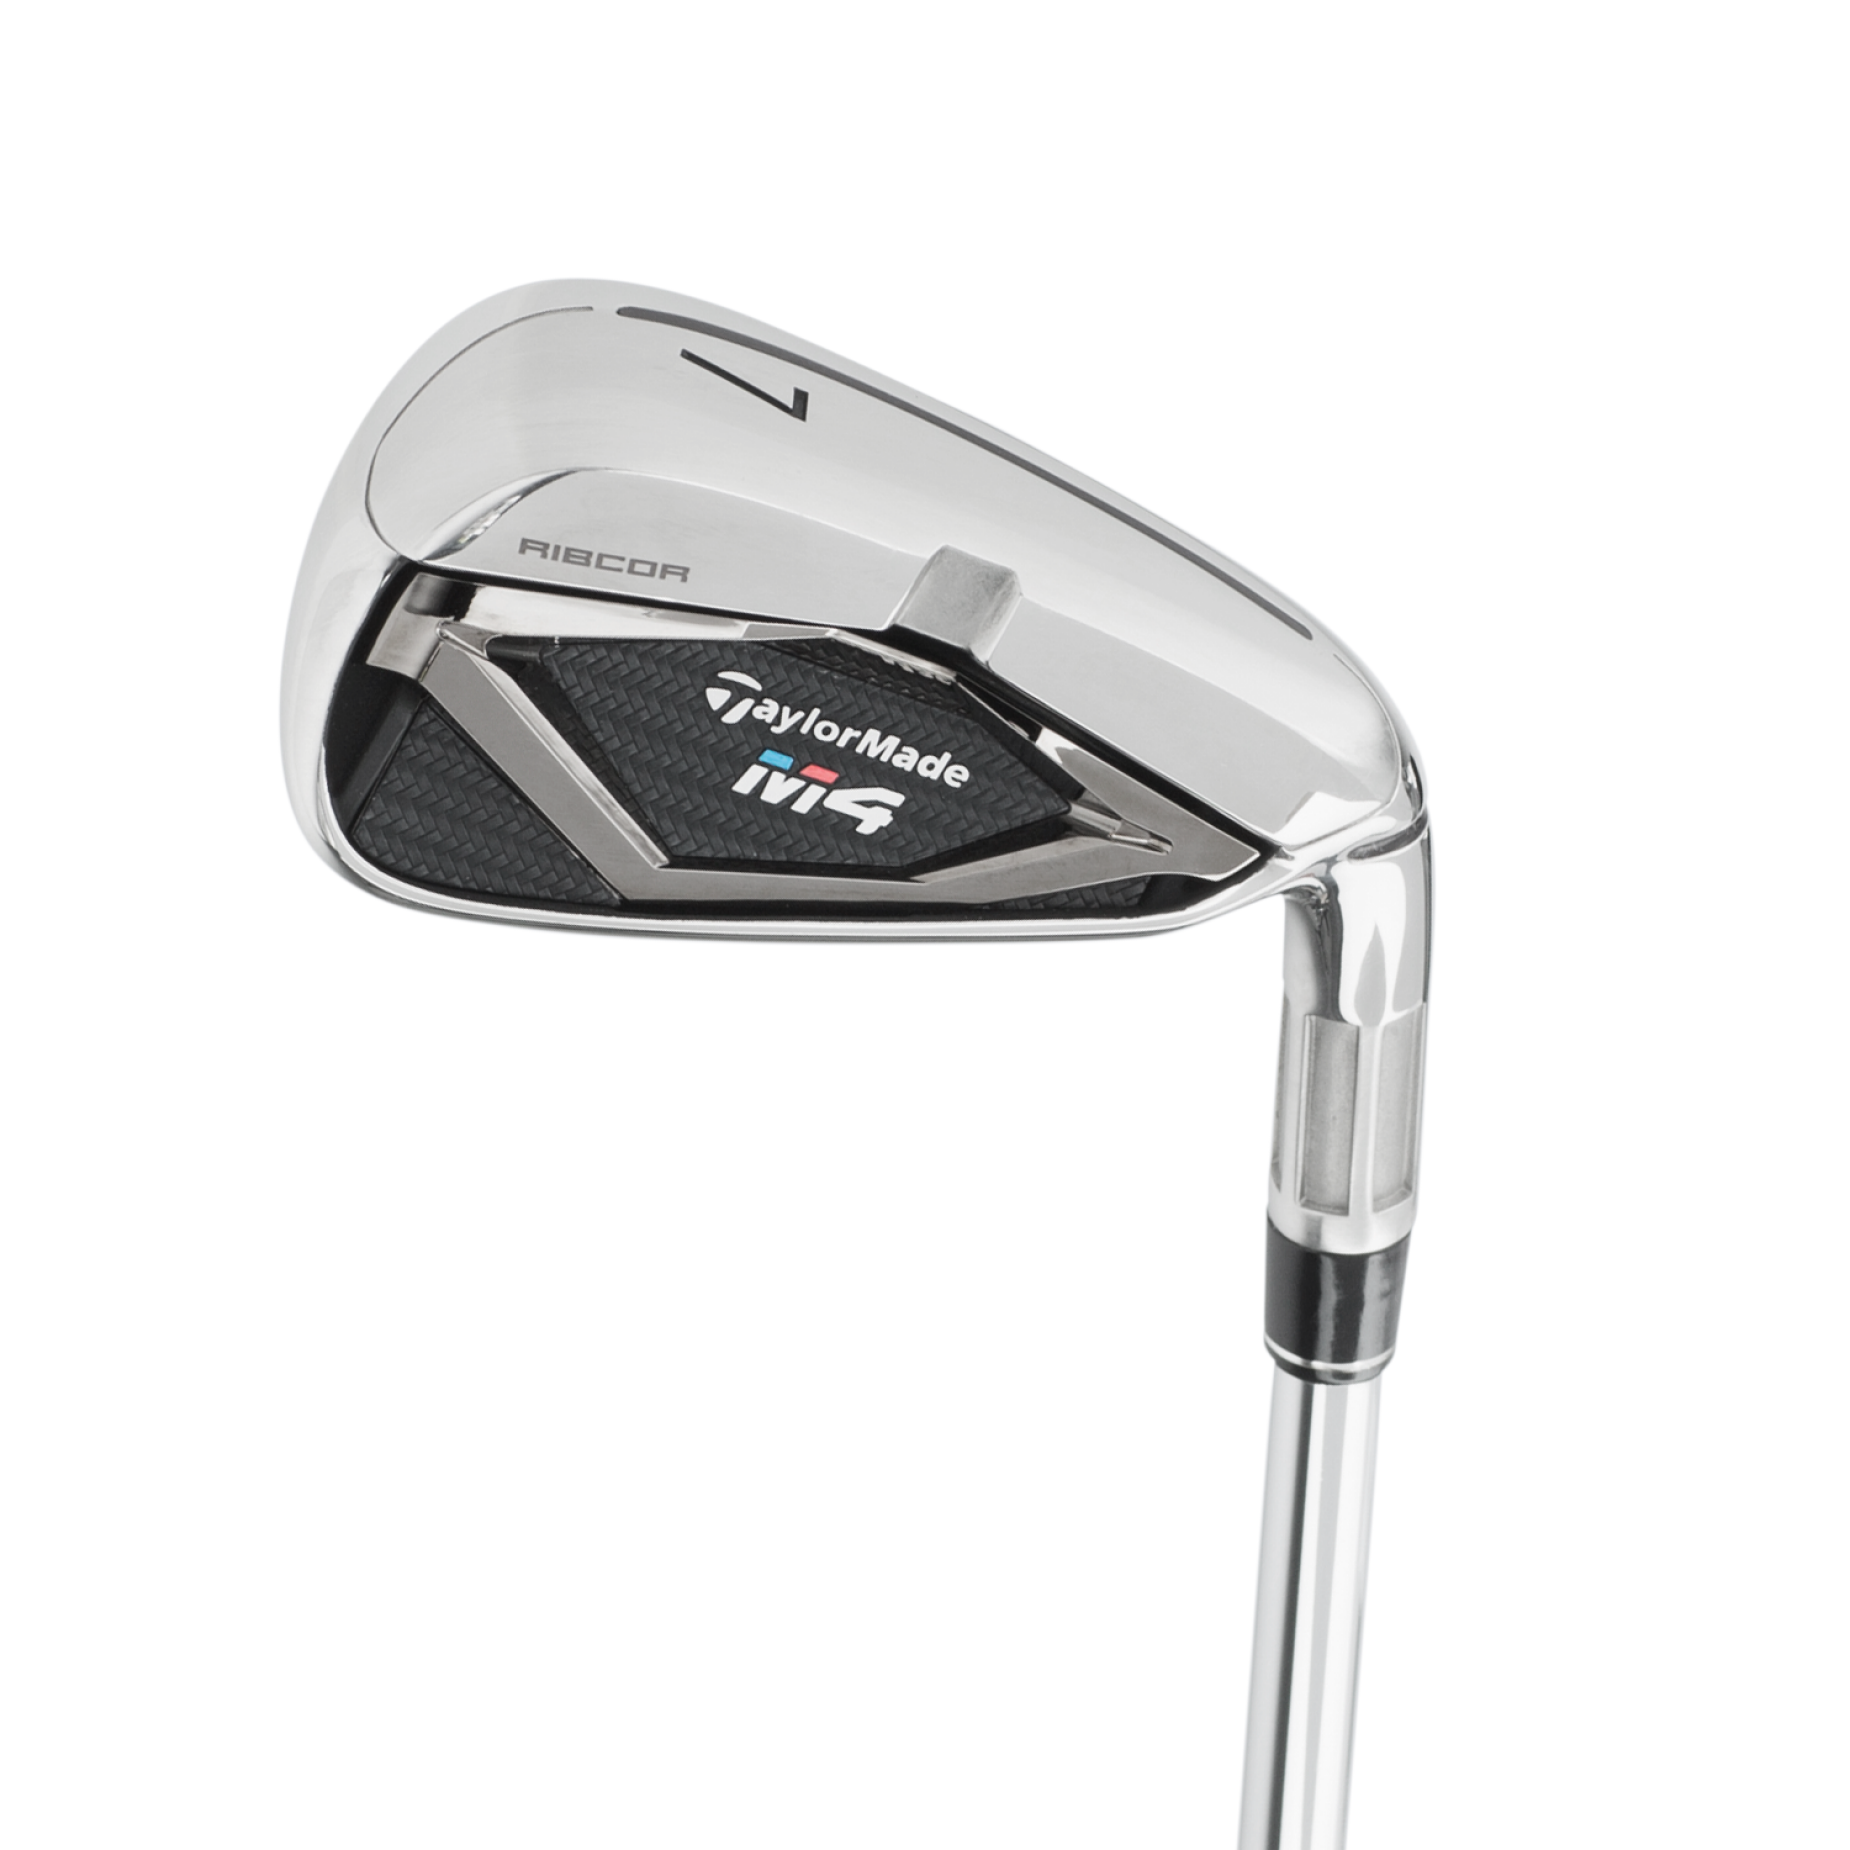 0318-GI-Beauty-TaylorMade-M4.png